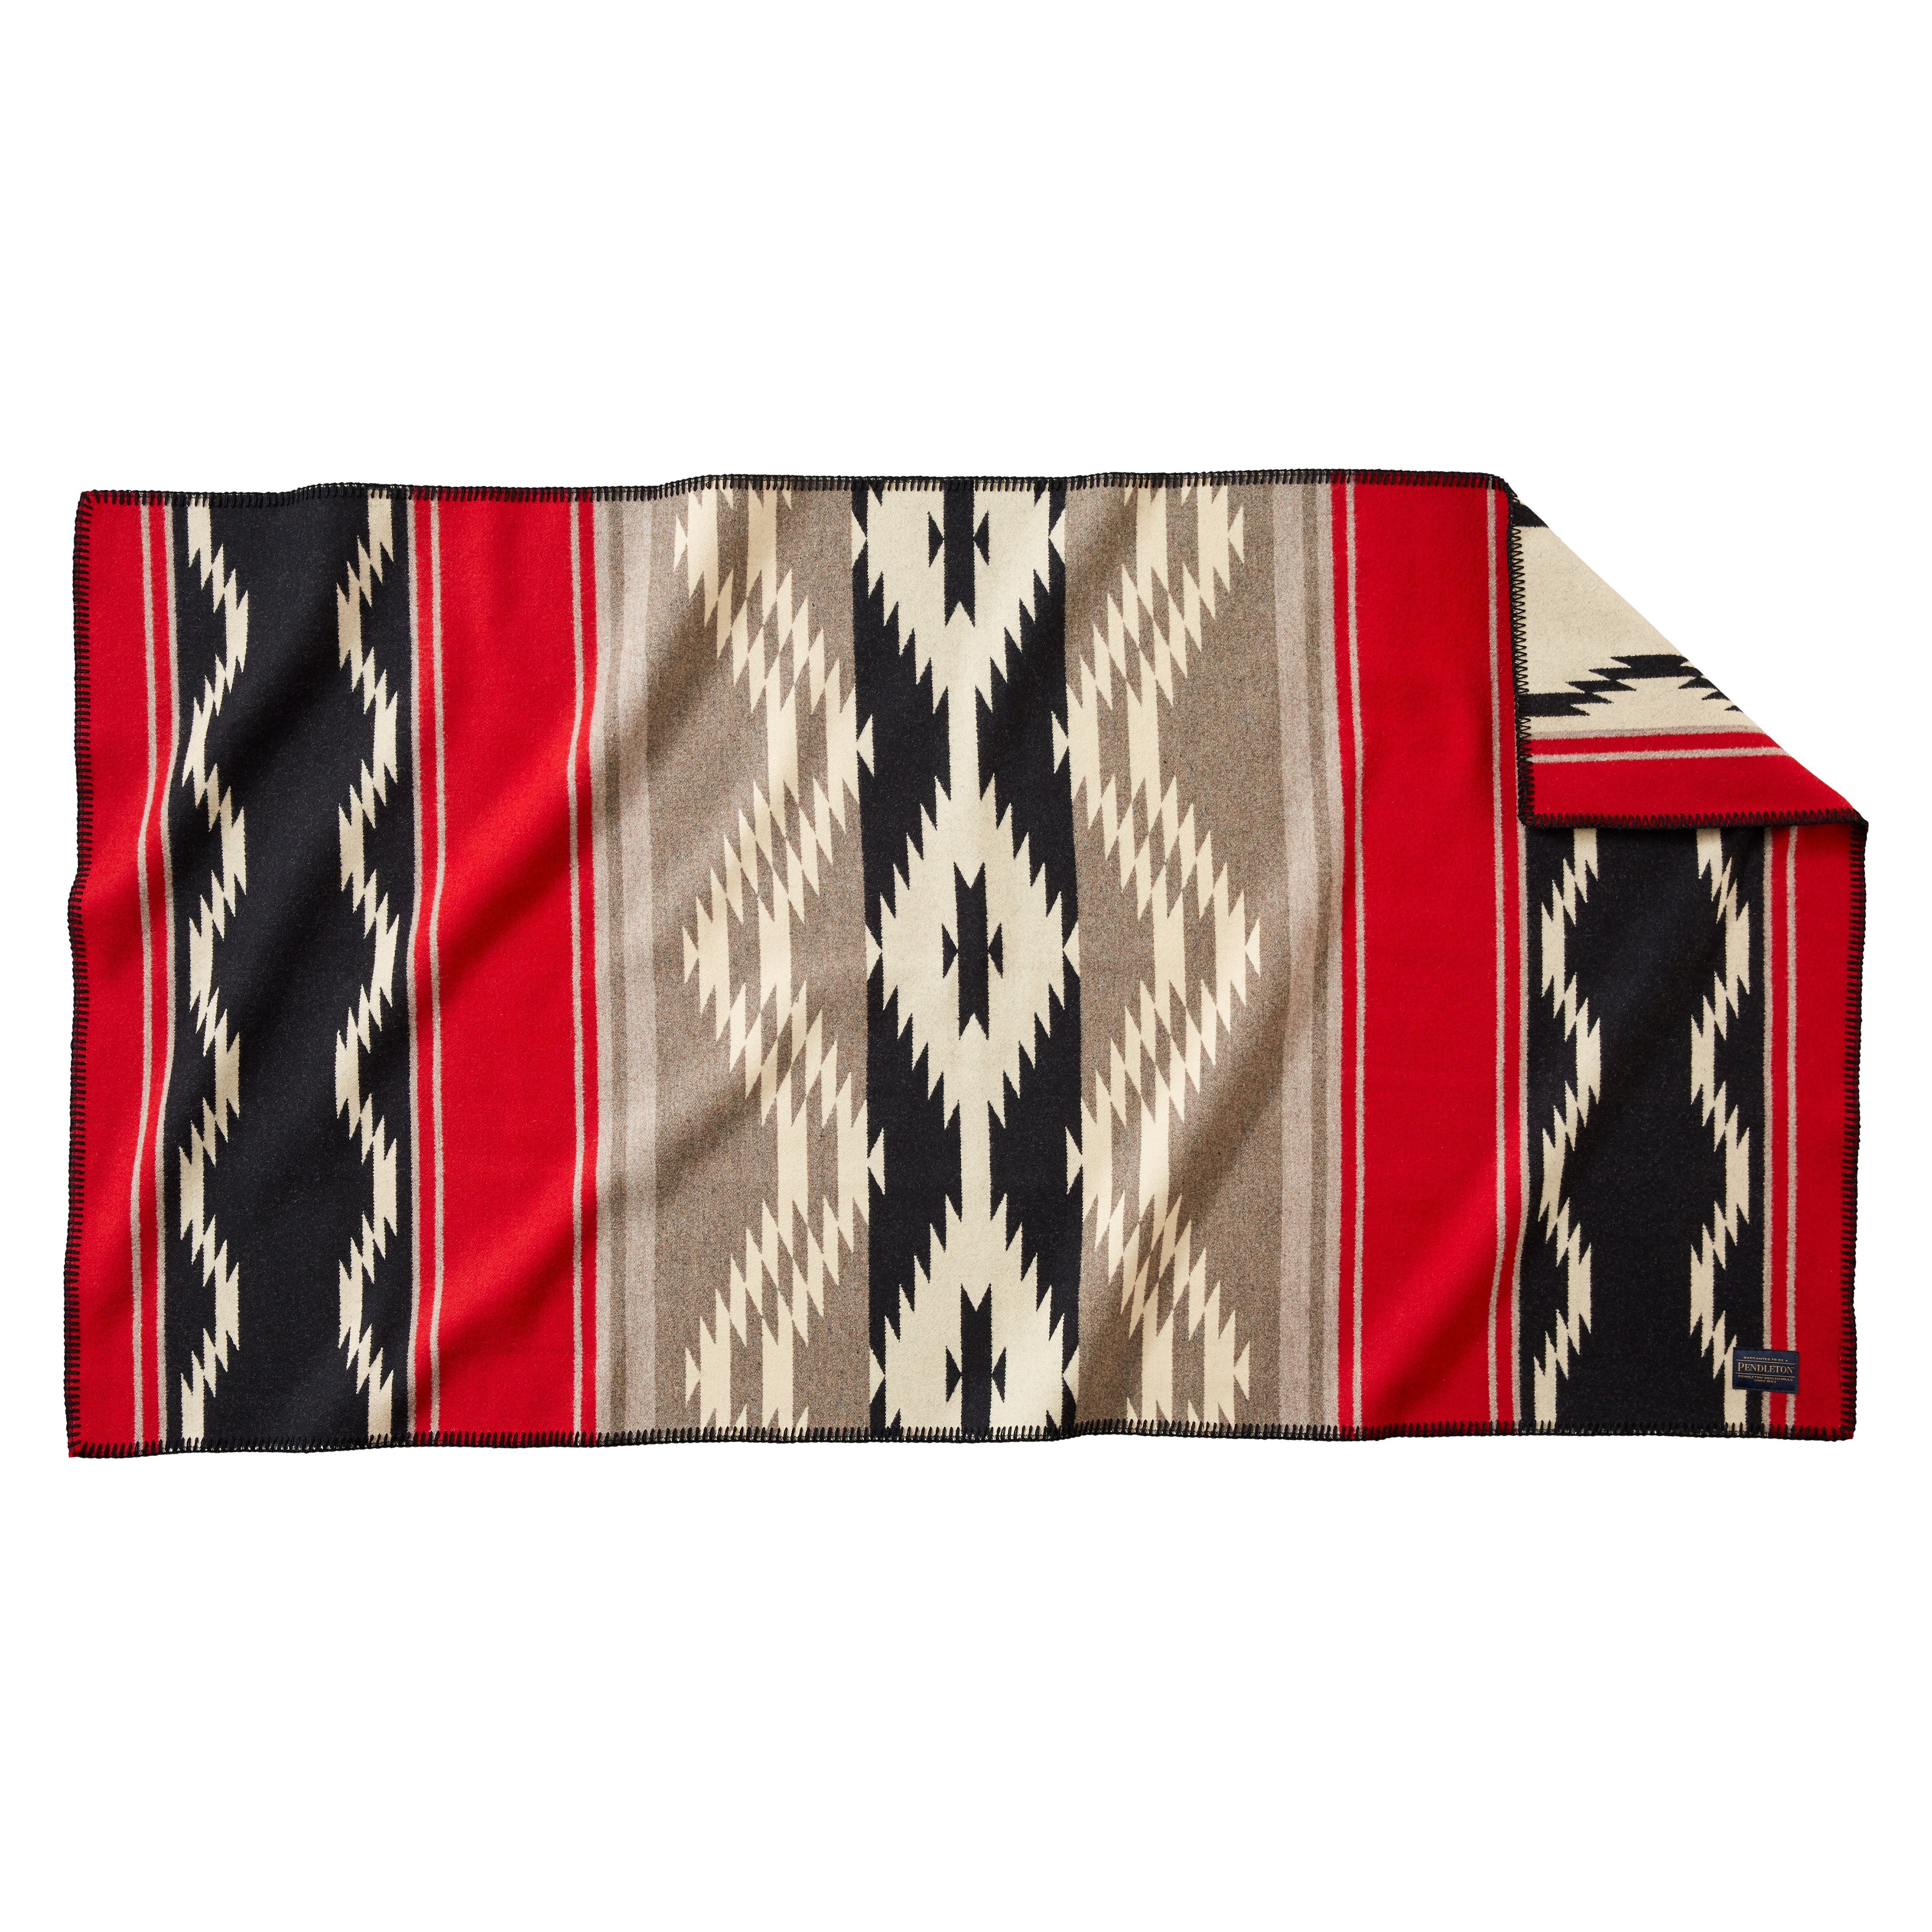 Special Edition Water Blanket, front and back views. This limited edition 60” x 32” saddle blanket was made from the singular specially woven blanket that appeared in the American Indian College Fund’s PSA. It is available for sale on Pendleton’s website at www.pendleton-usa.com. The retail cost is $199. Pendleton will donate a portion of the proceeds to the American Indian College Fund.